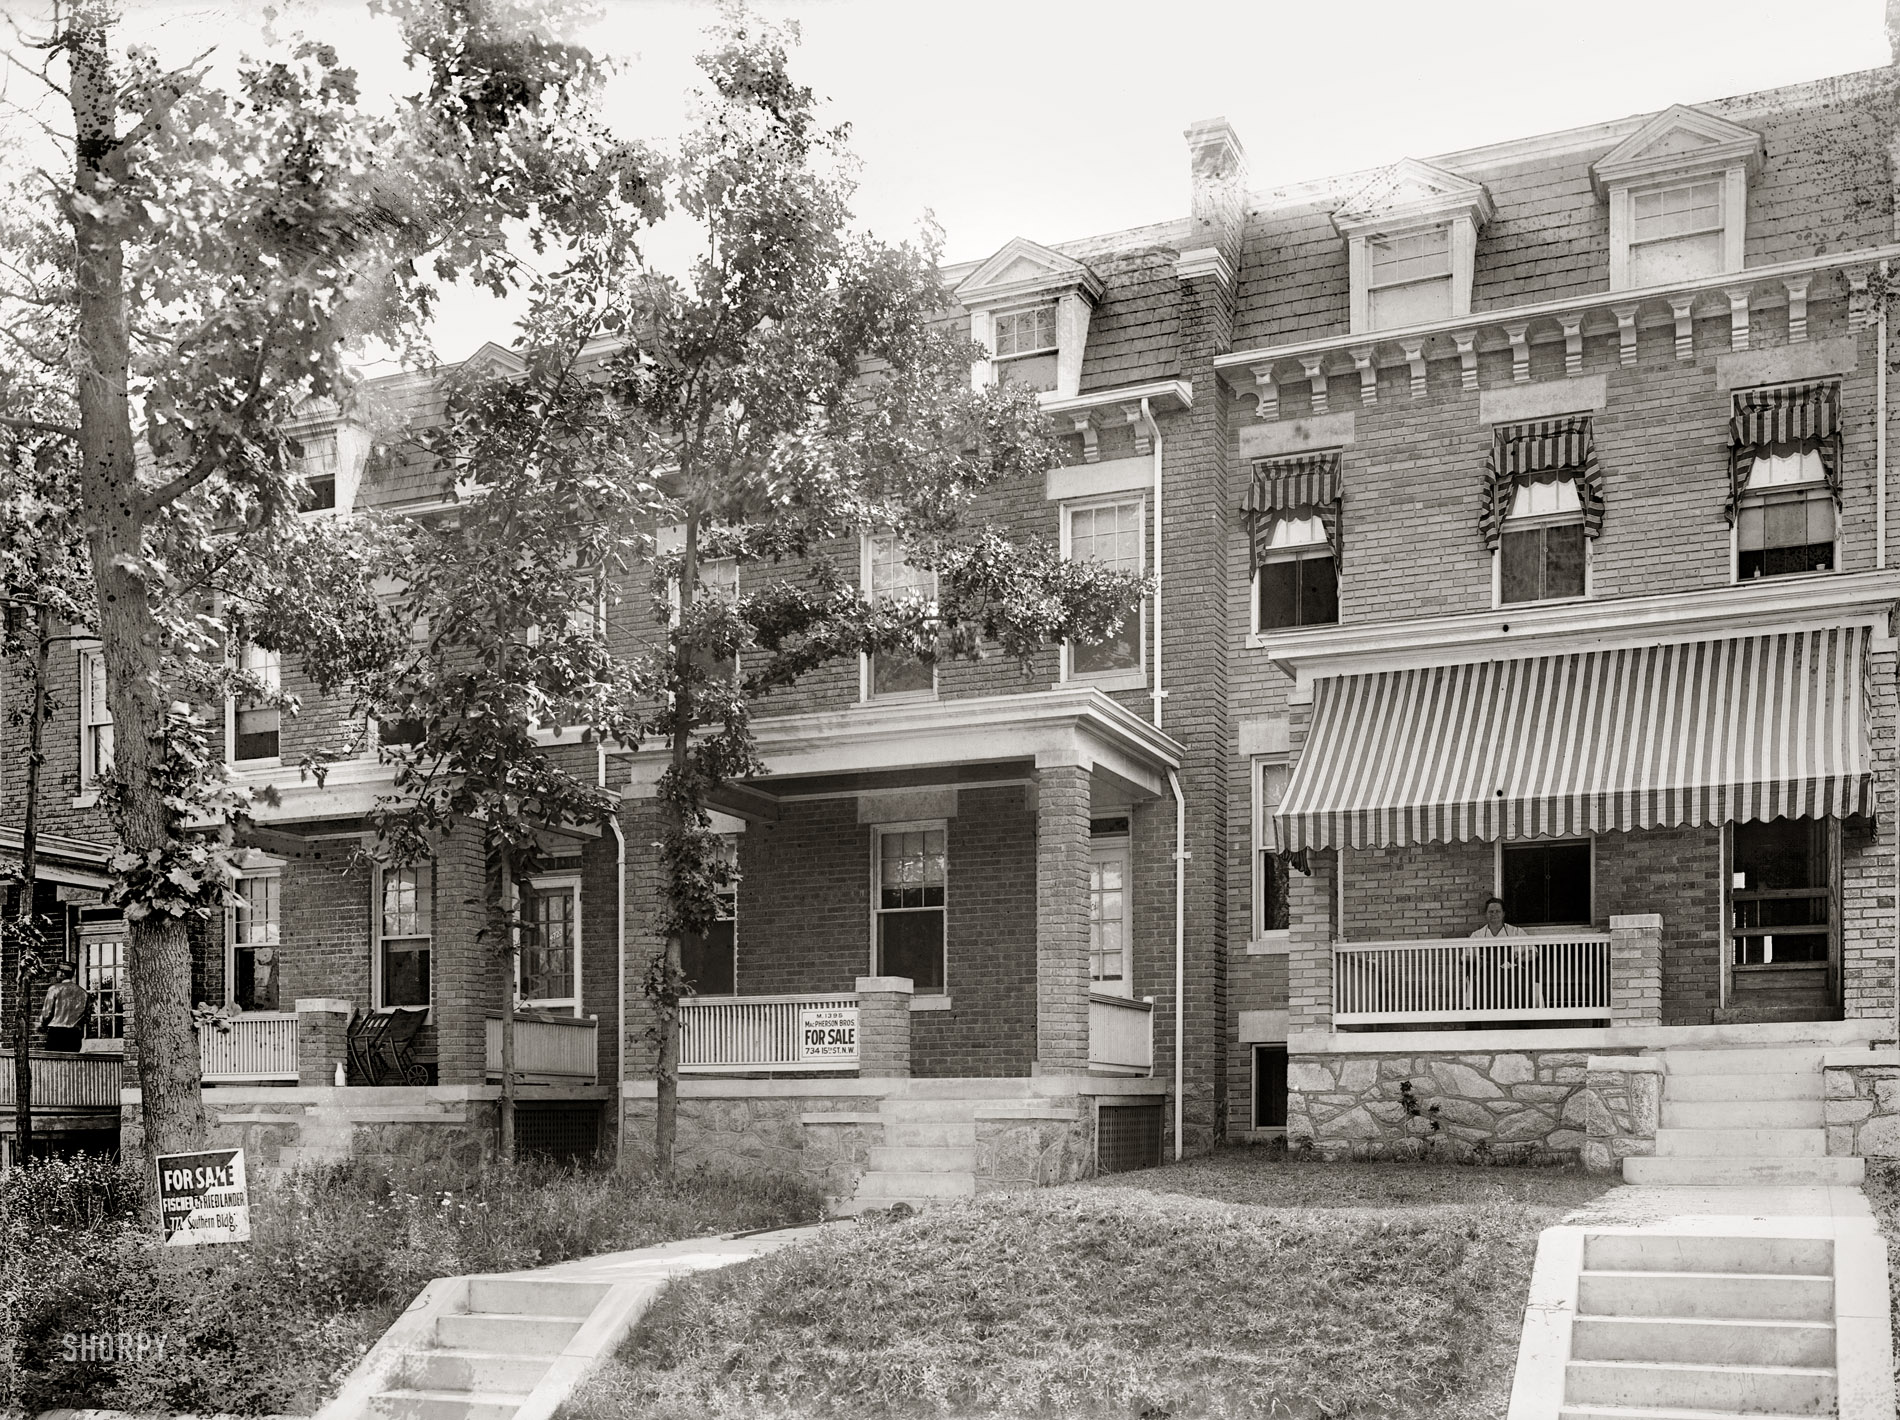 "Washington Times. 4721 Georgia Avenue N.W." Circa 1920 comes this picture taken for a real-estate ad. National Photo Co. glass negative. View full size.